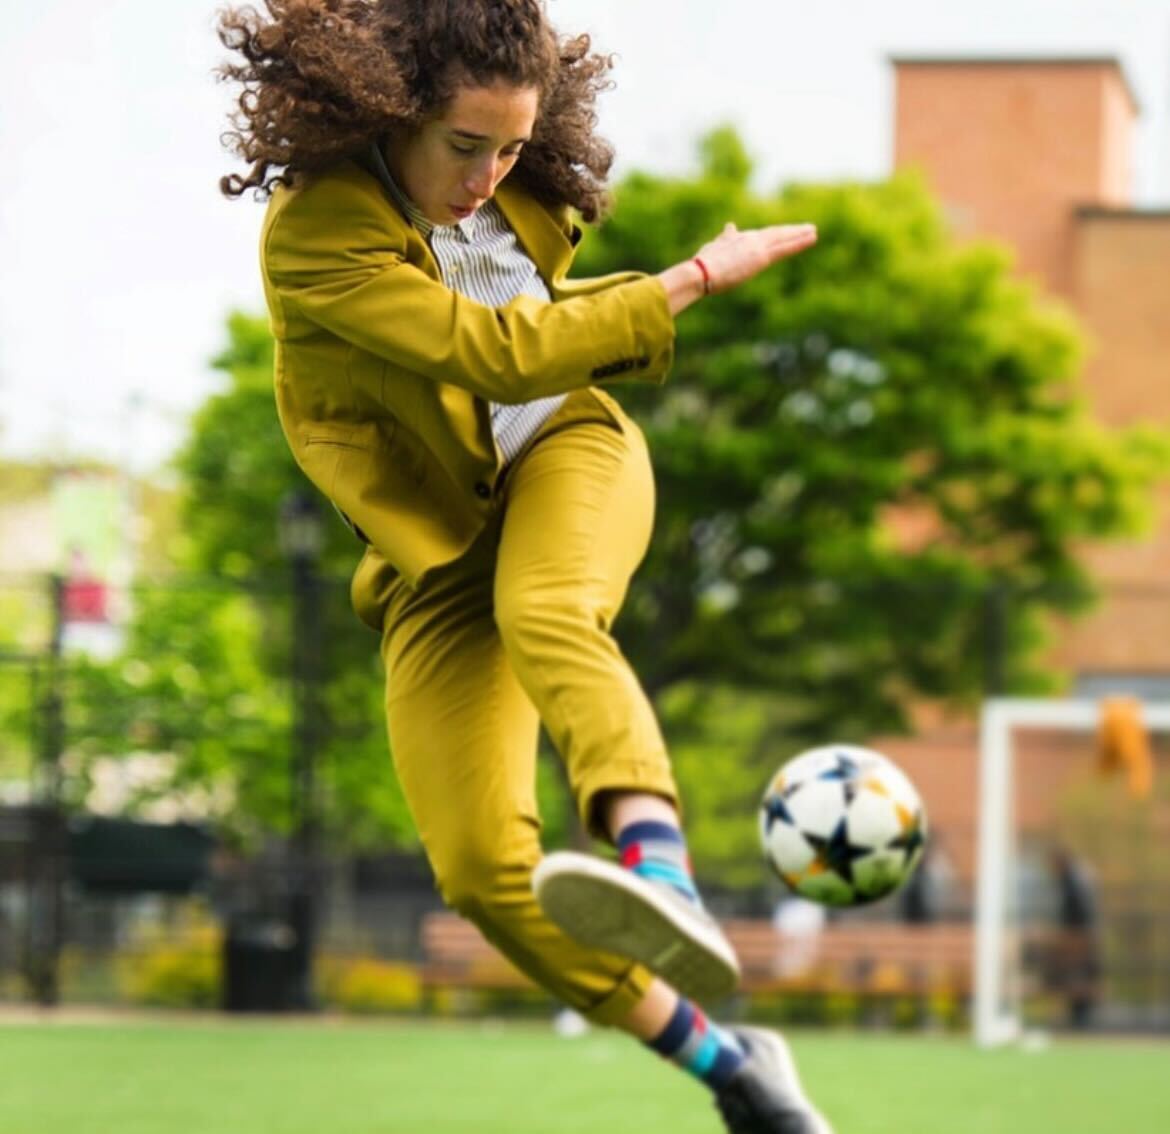 Alumna+Lorena+Russi%2C+who+recently+starred+in+a+Women%E2%80%99s+World+Cup+ad%2C+discusses+her+career+in+comedy+and+as+a+pro-soccer+player.